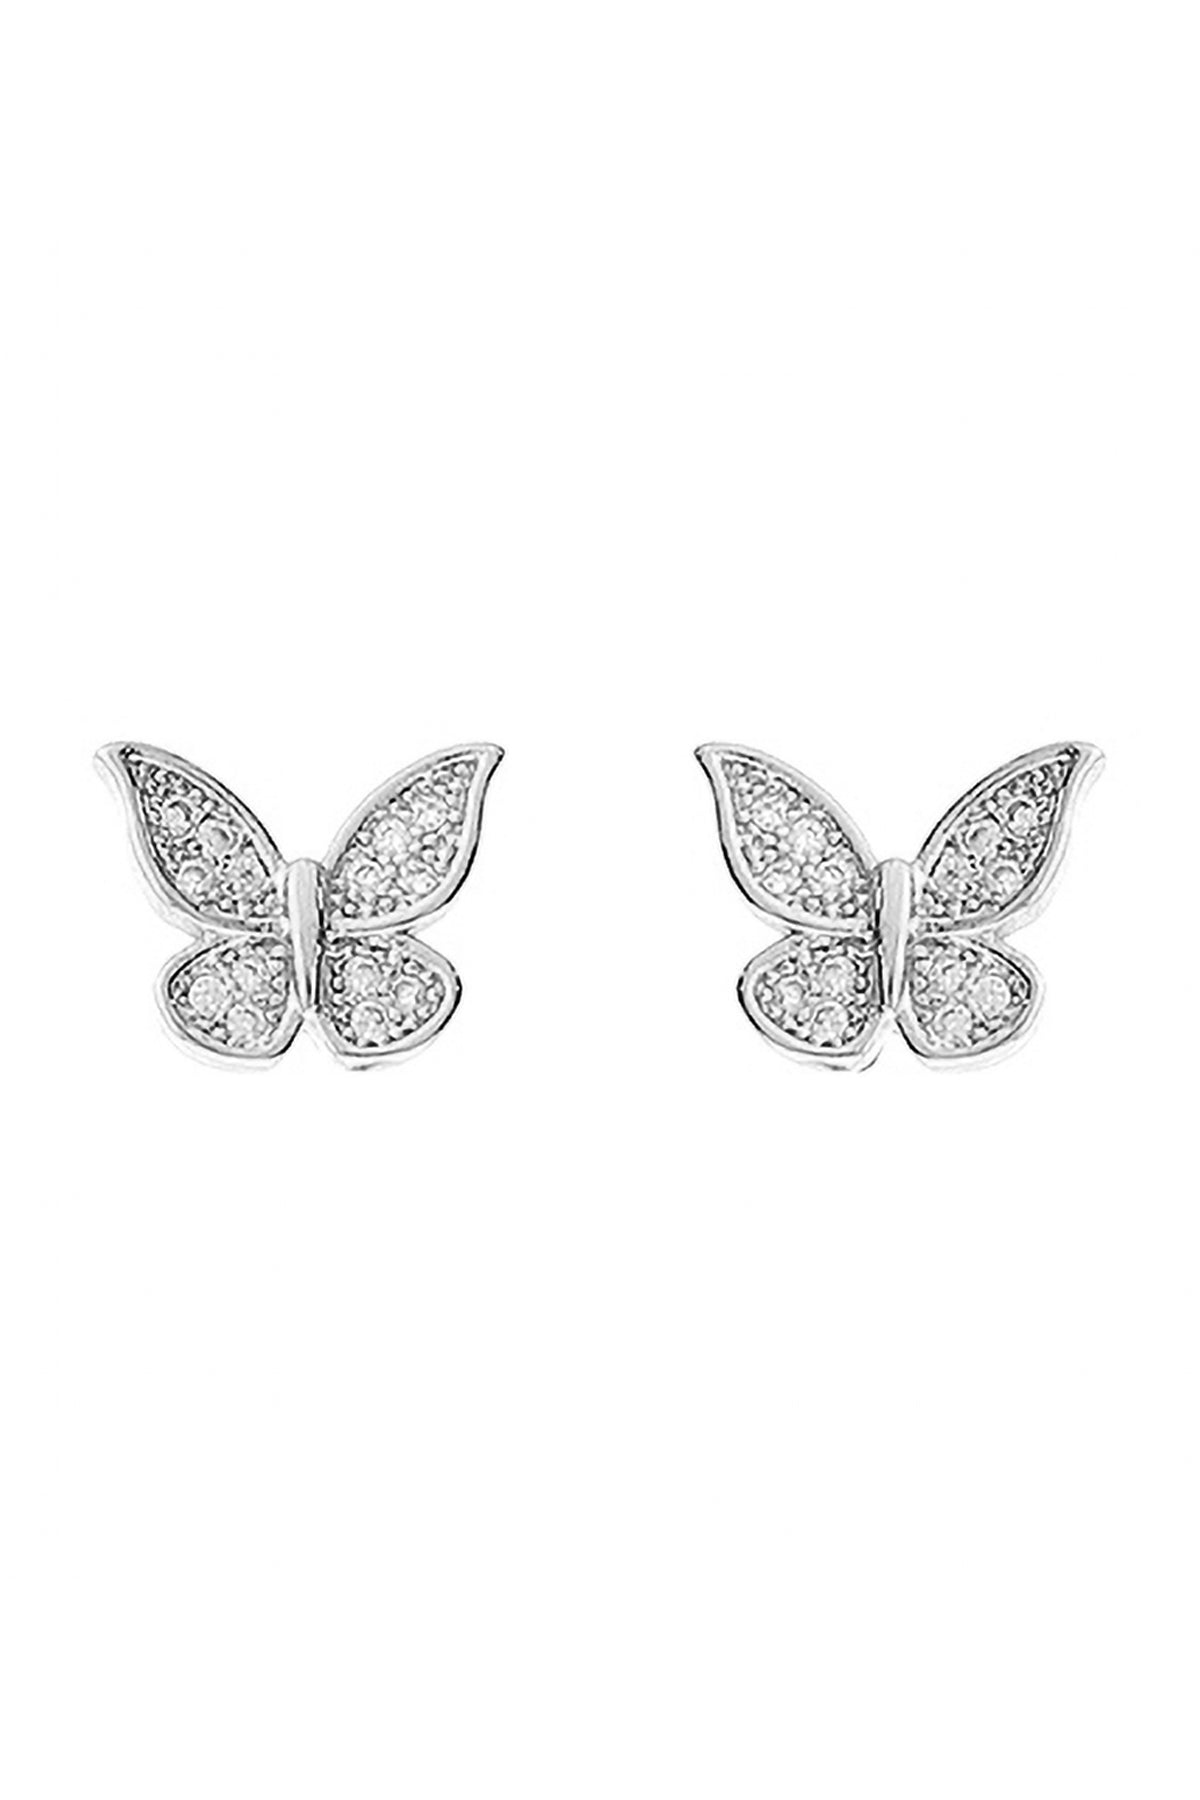 CUBIC ZIRCONIA PAVE TINY BUTTERFLY STUD EARRINGS